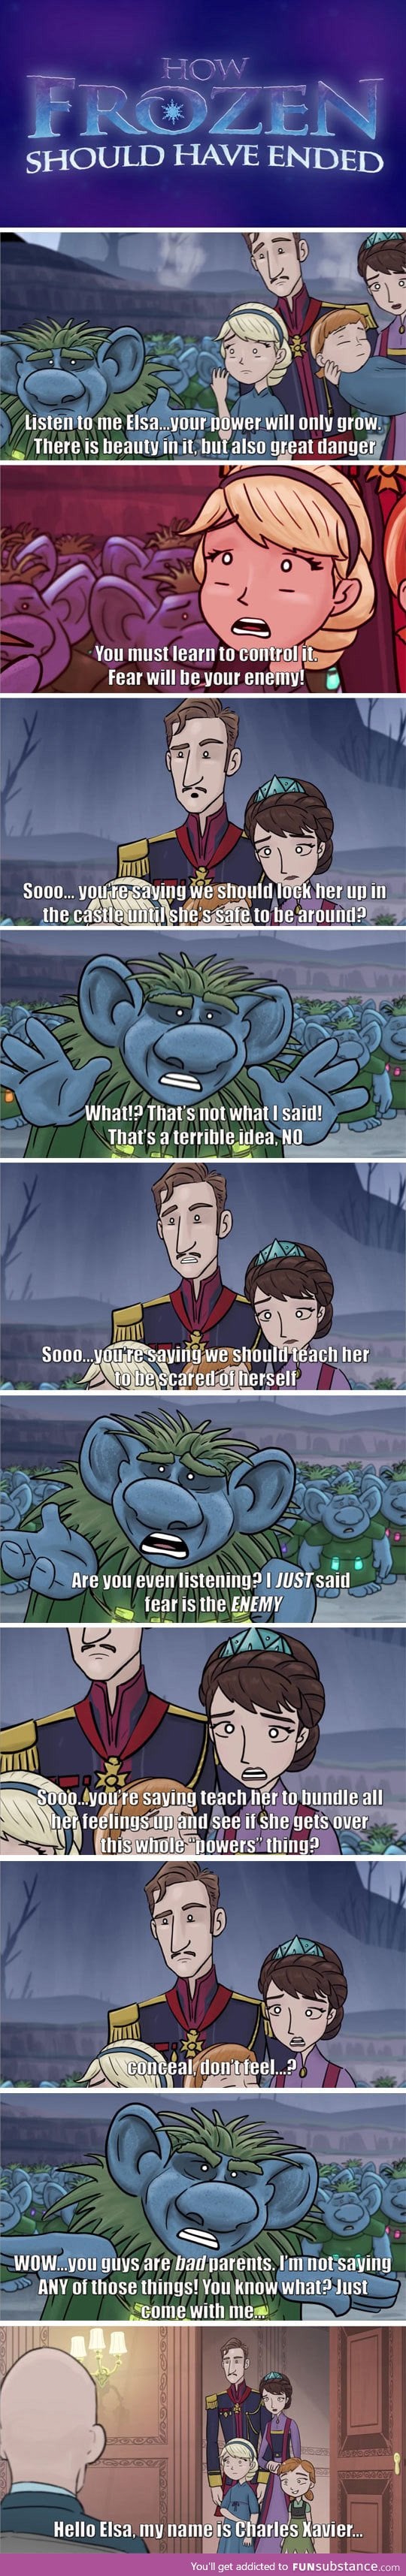 How frozen should have really ended